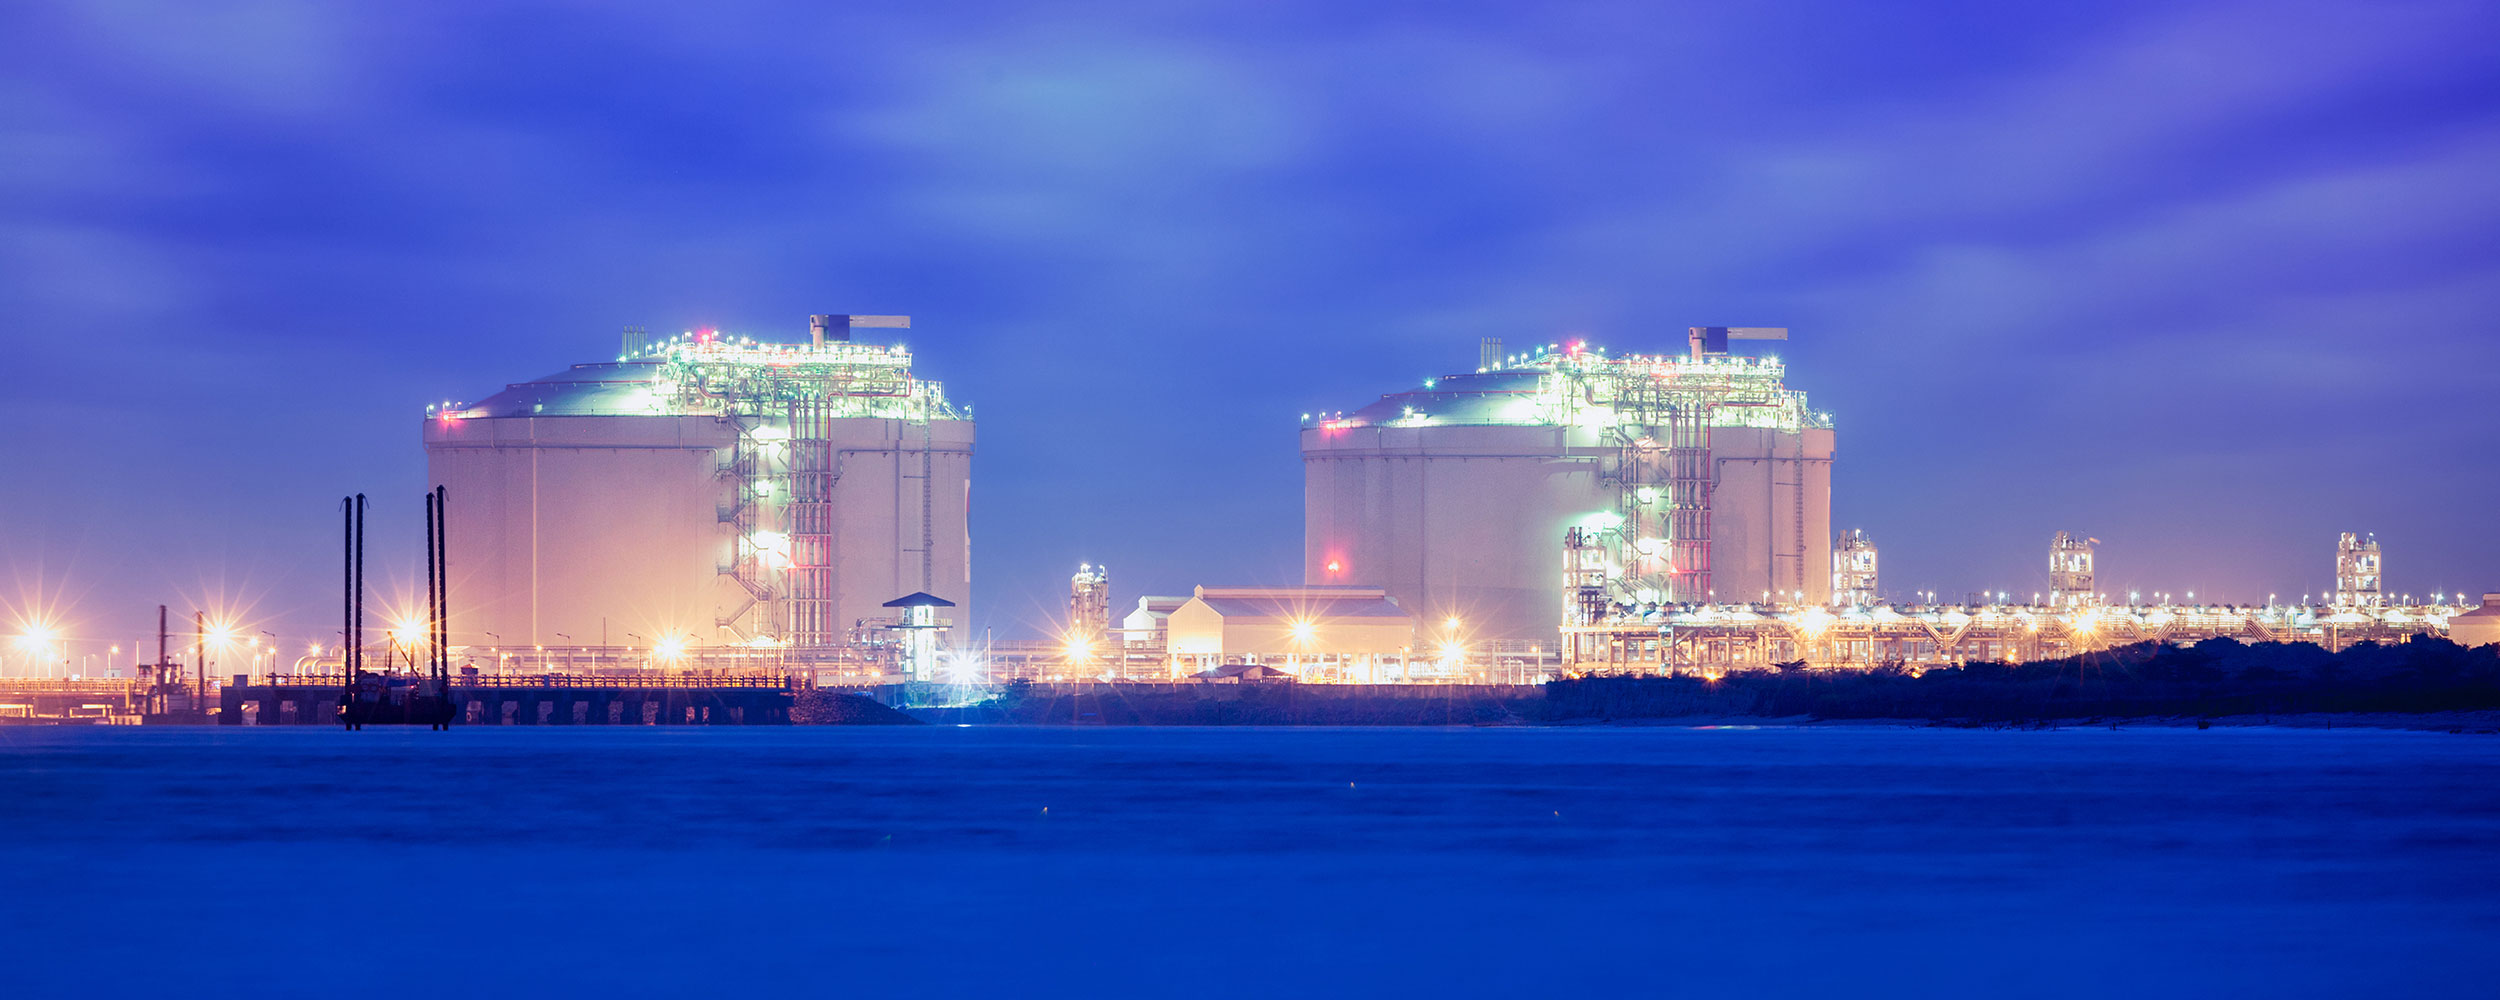 Night view of an LNG facility